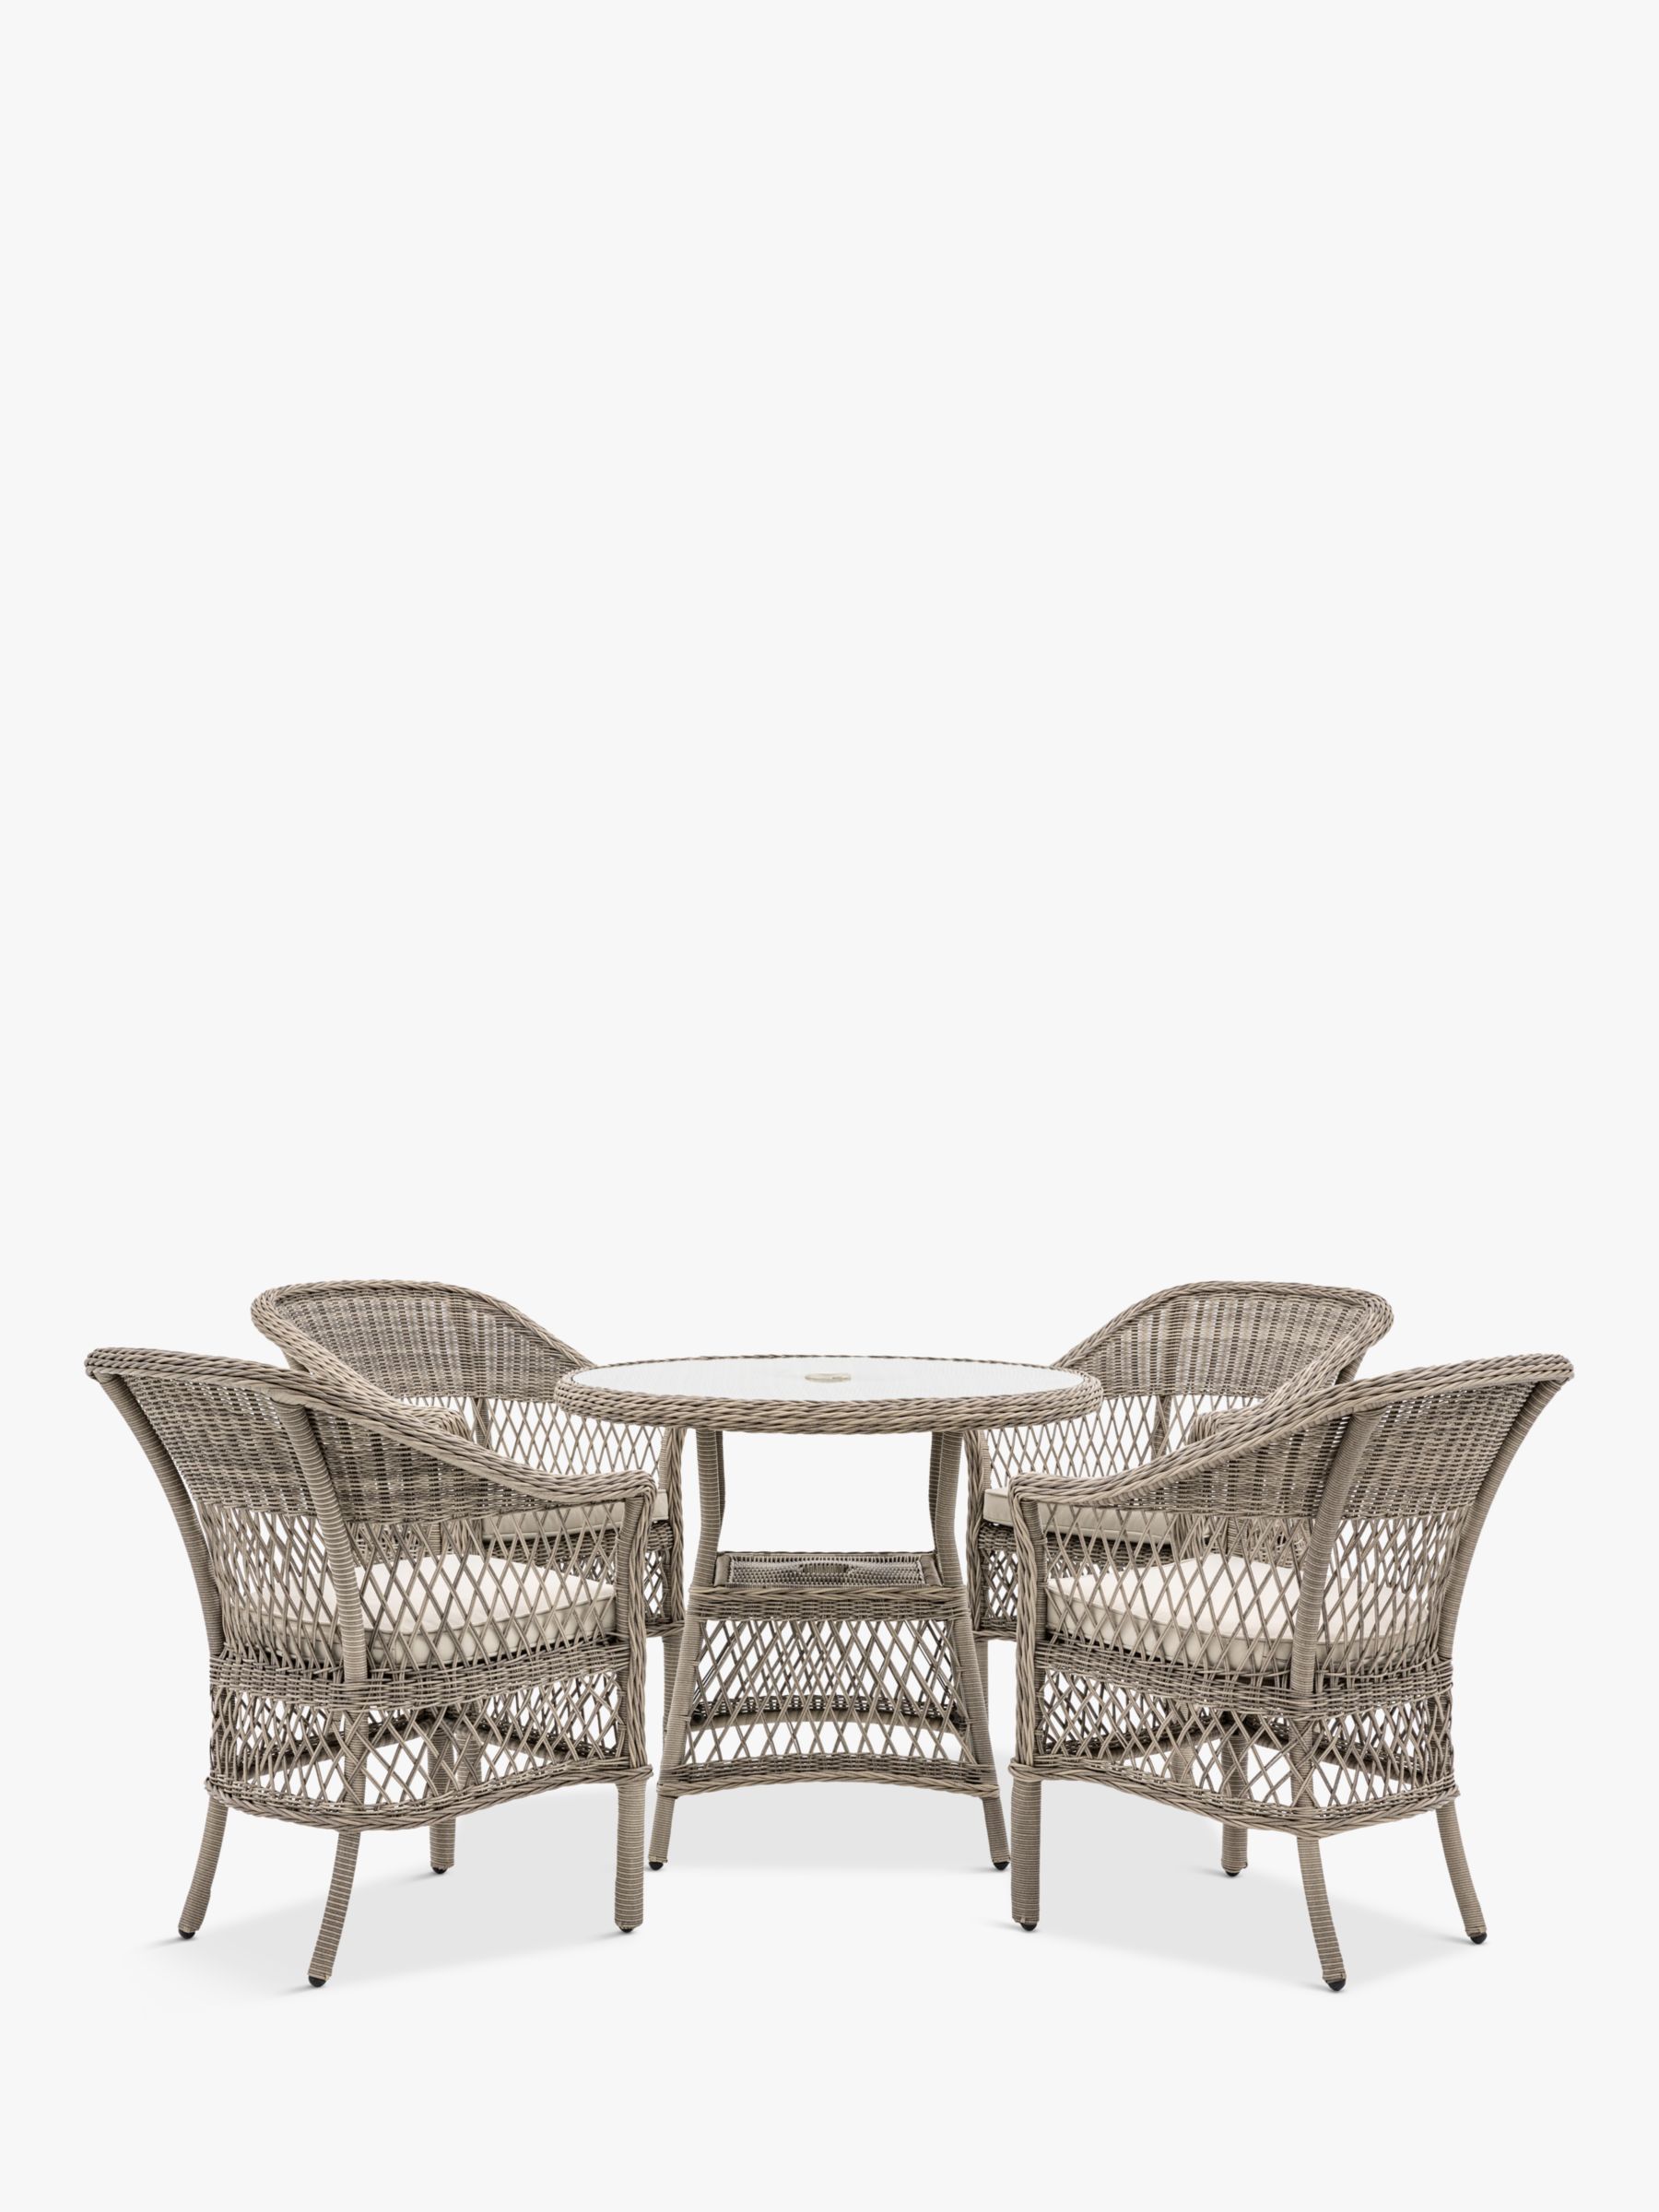 Gallery Direct Menton 4-Seater Round Garden Dining Table